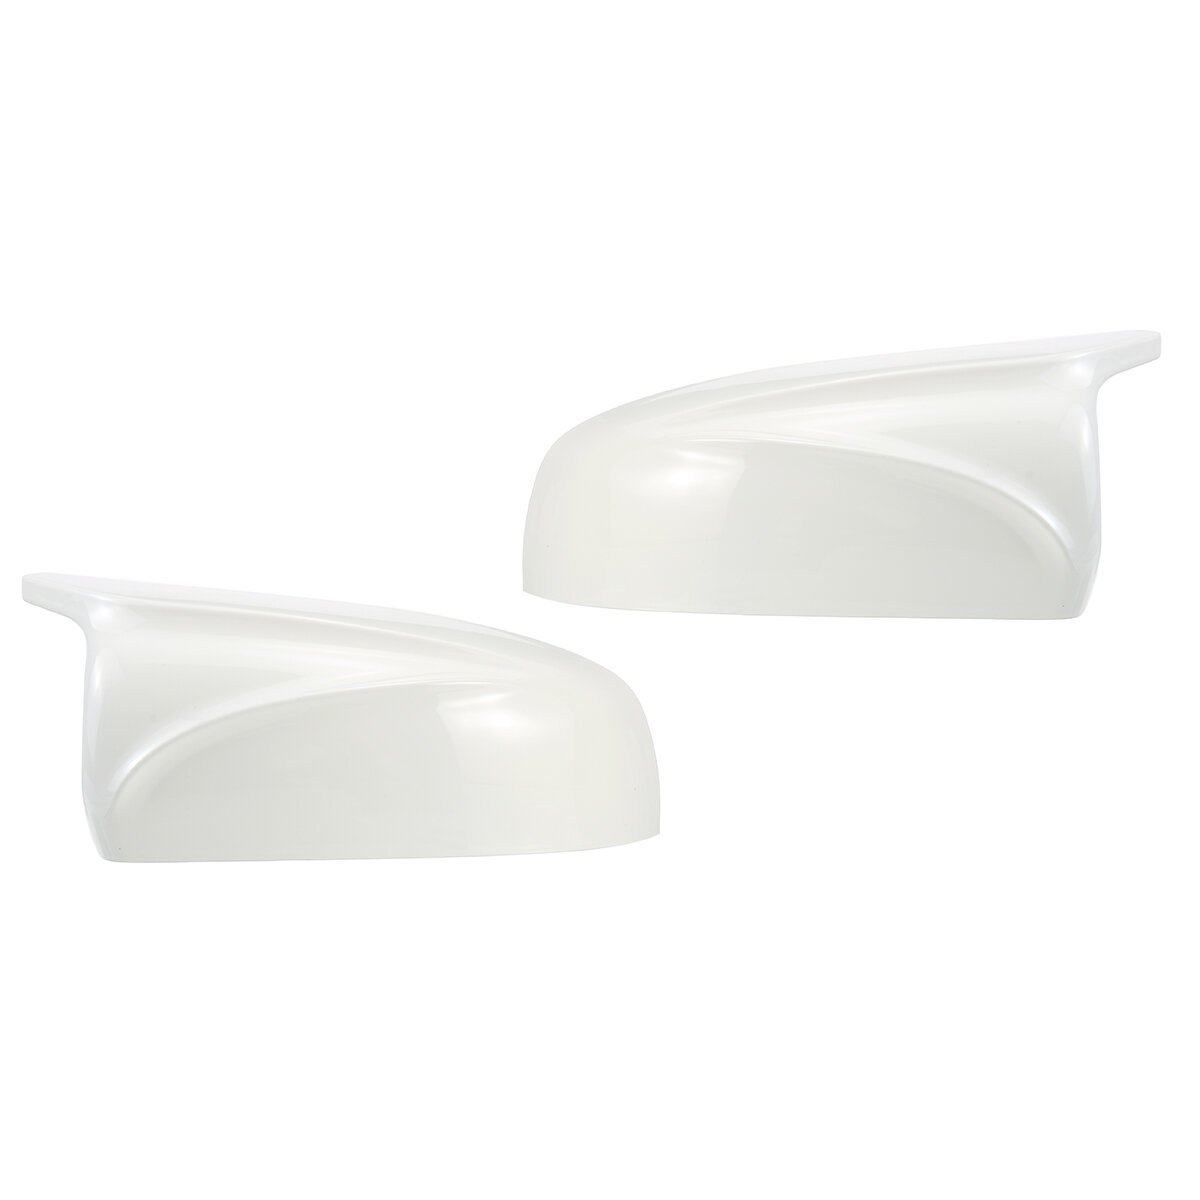 1 Pair Glossy White Rear View Mirror Cap Cover Replacement Left & Right For BMW X5 X6 E70 E71 2007-2013